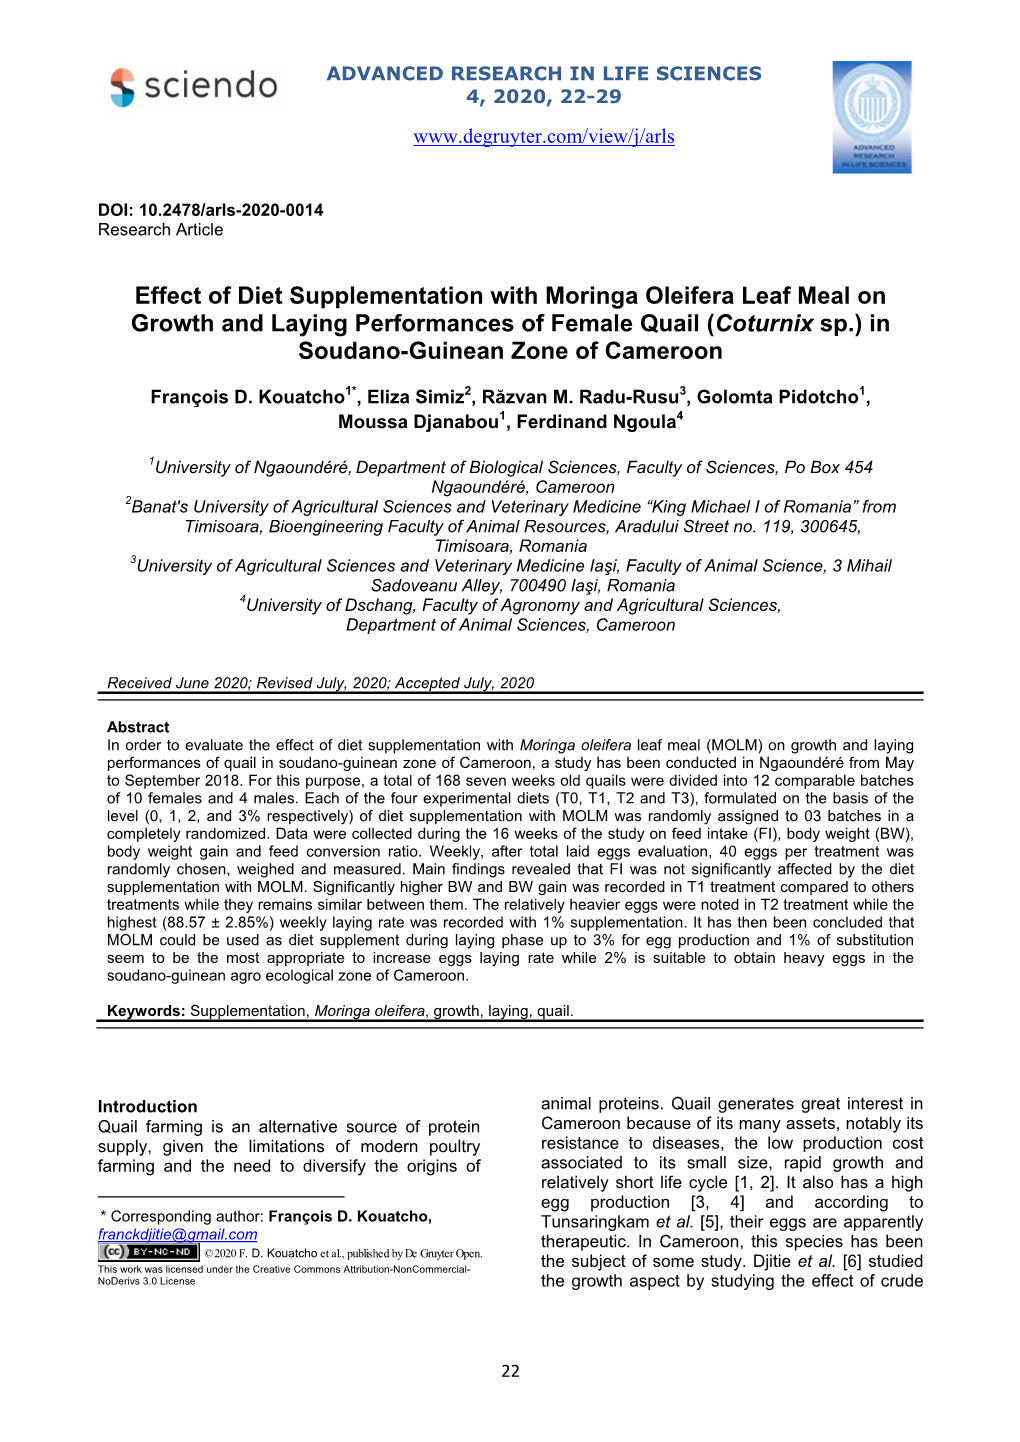 Effect of Diet Supplementation with Moringa Oleifera Leaf Meal on Growth and Laying Performances of Female Quail (Coturnix Sp.) in Soudano-Guinean Zone of Cameroon